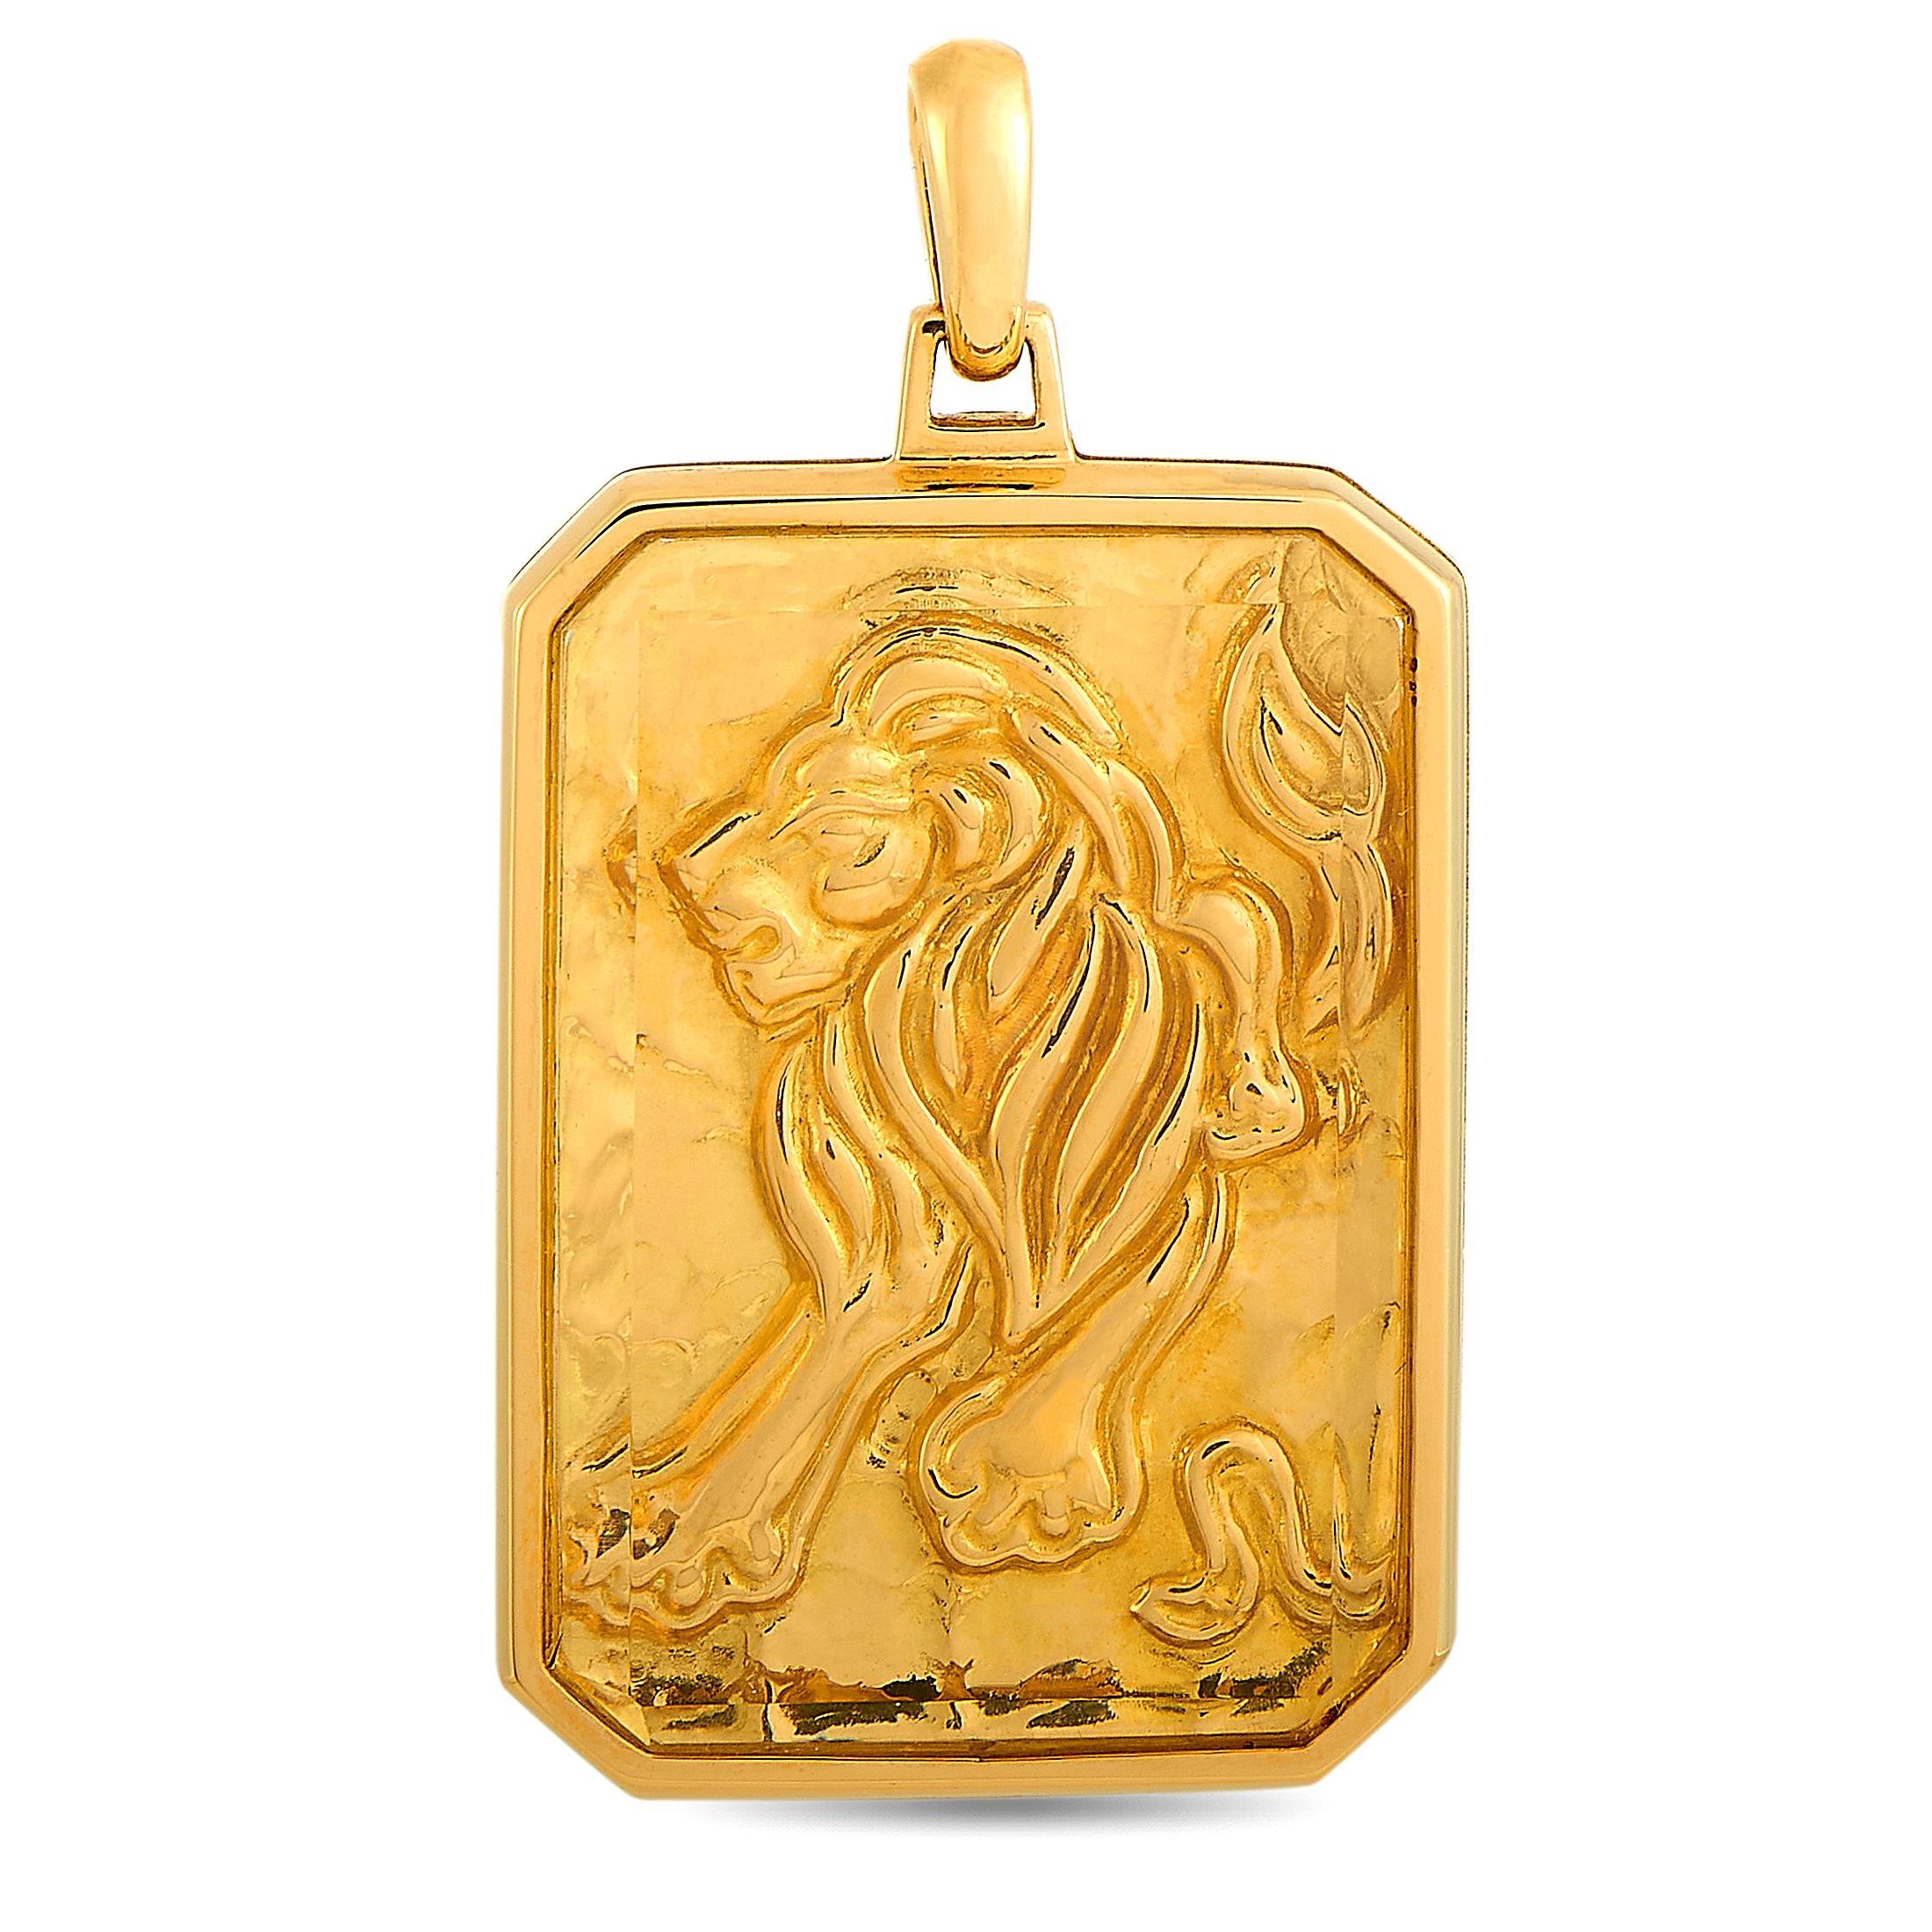 This vintage Cartier pendant is crafted from 18K yellow gold and boasts a depiction of a Leo - the fifth astrological sign of the zodiac. The pendant weighs 25.1 grams and measures 1.88” in length and 1” in width.

Offered in estate condition, this